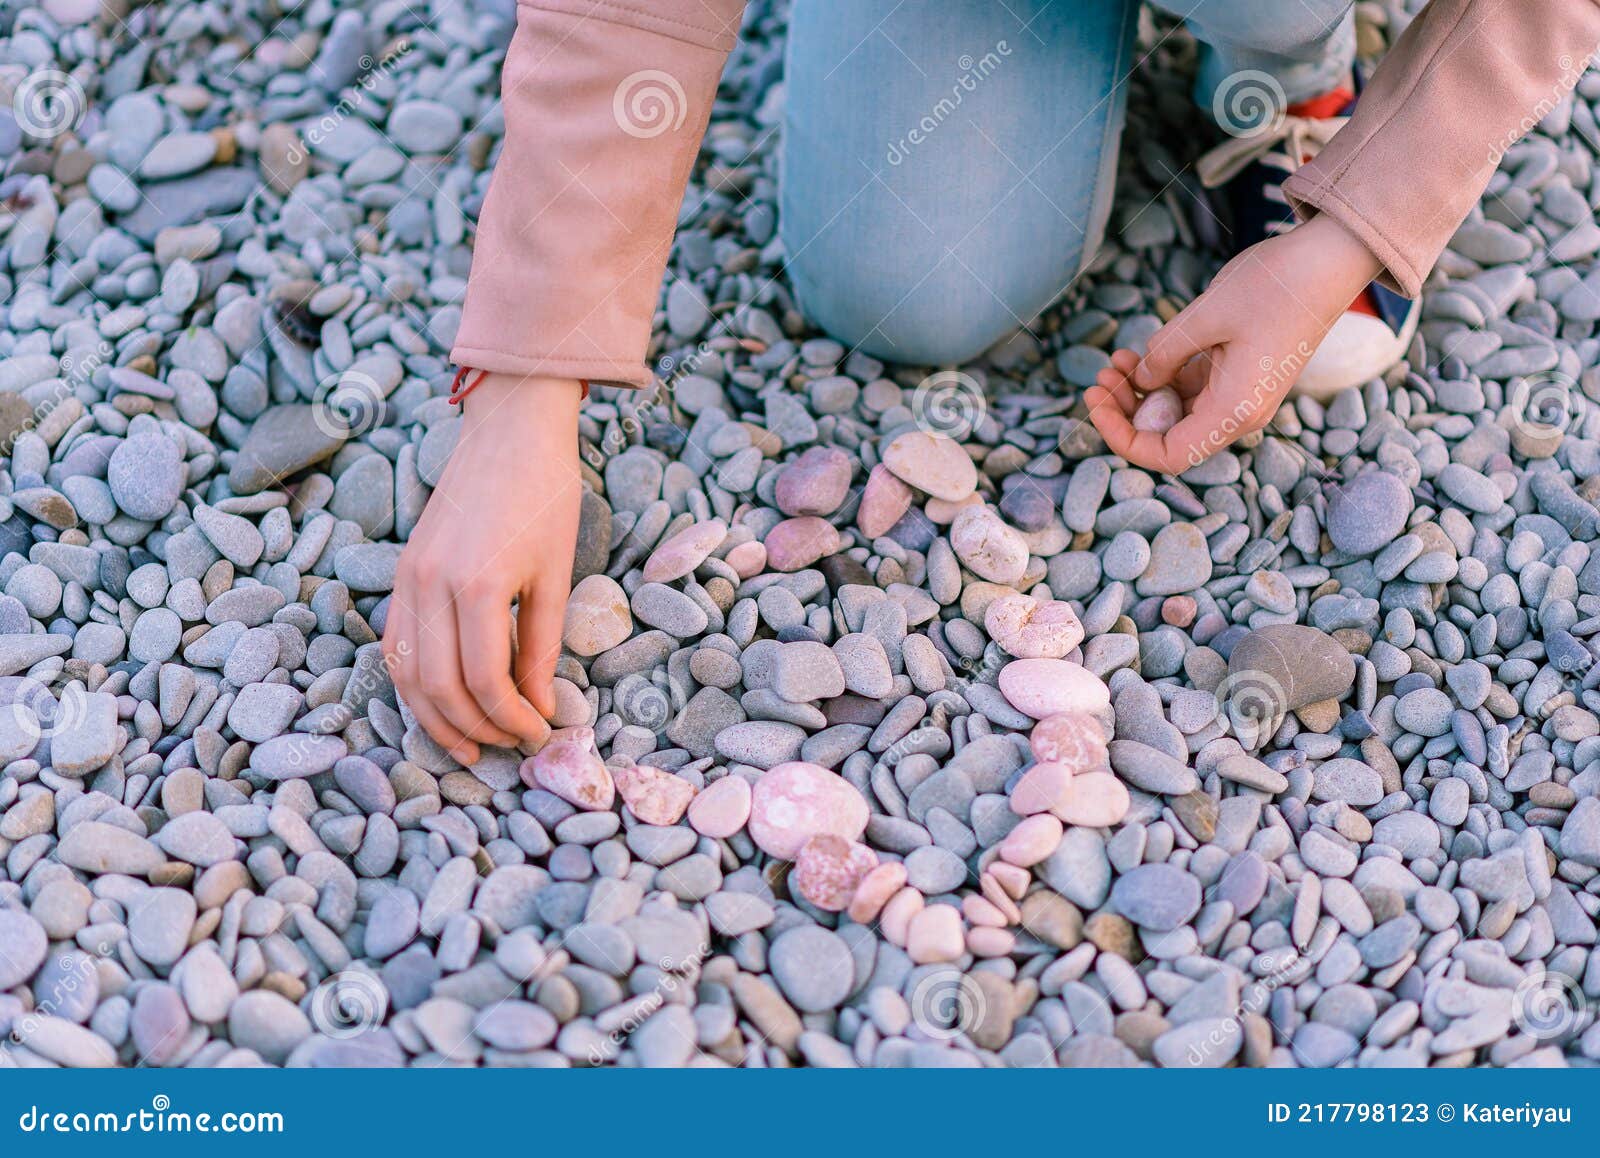 26 Man's Hand Picking Stones Images, Stock Photos, 3D objects, & Vectors